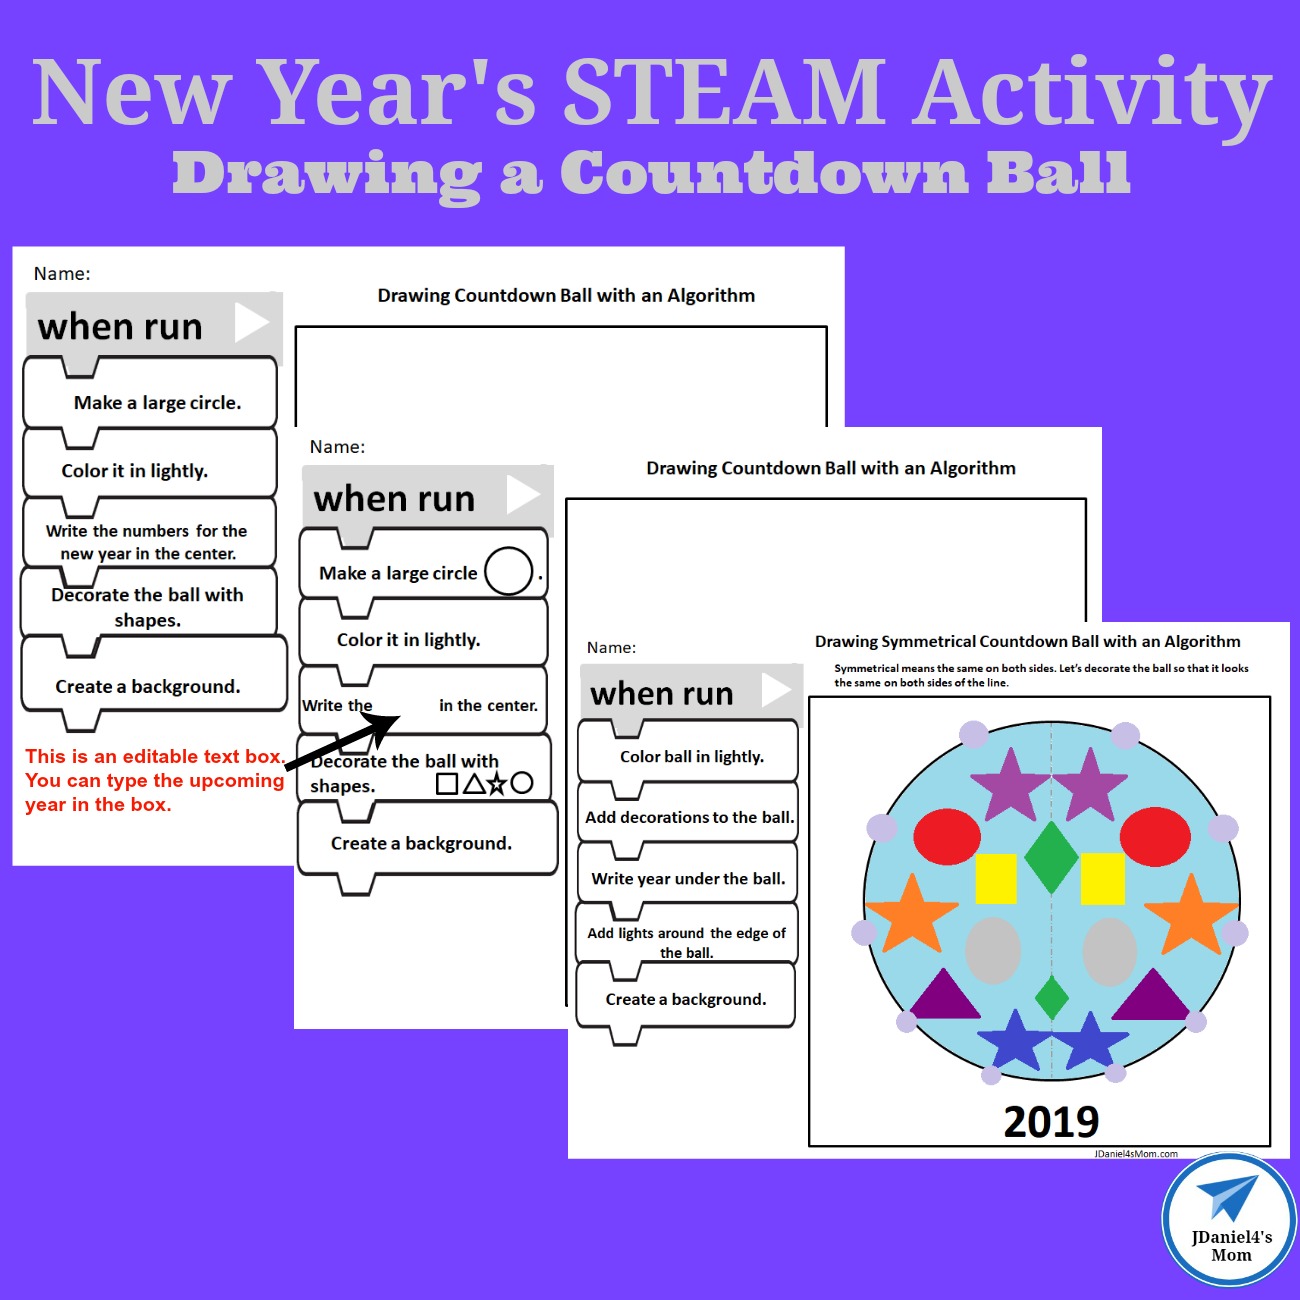 A schematic presentation of the main algorithms of the STEAM model. The